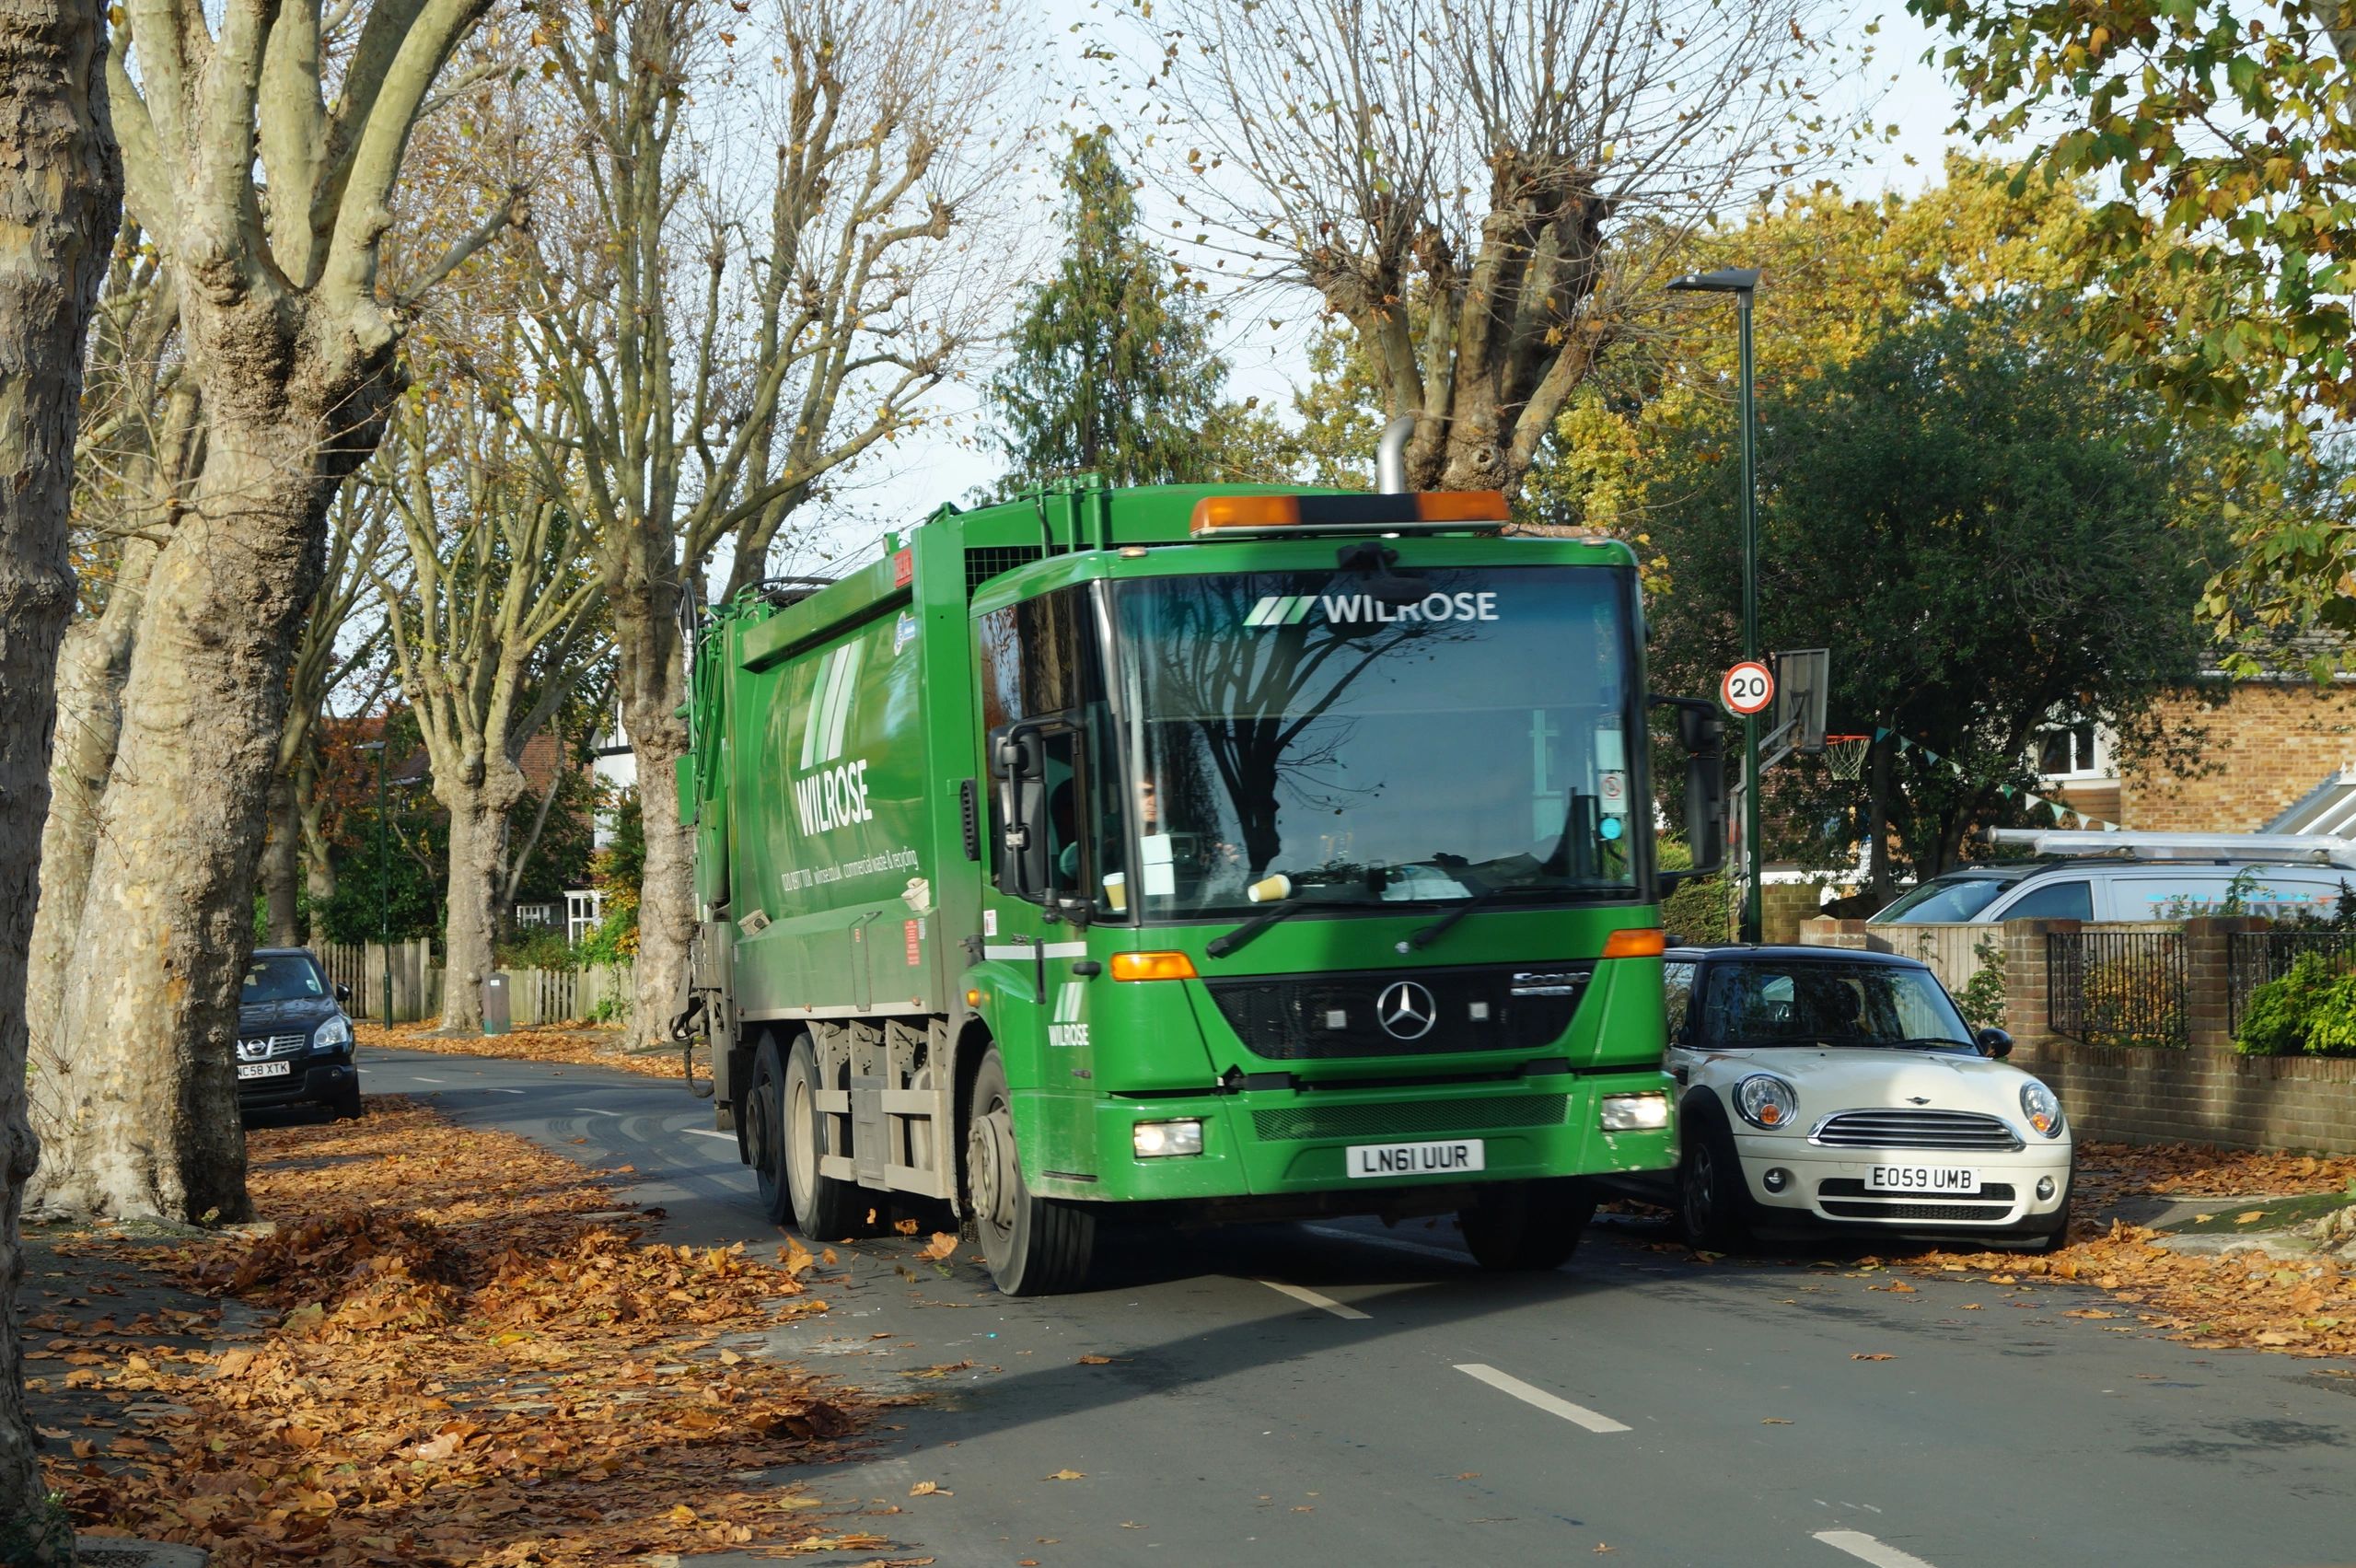 Wilrose dustcart in reigate driving down the road with commercial waste on it.